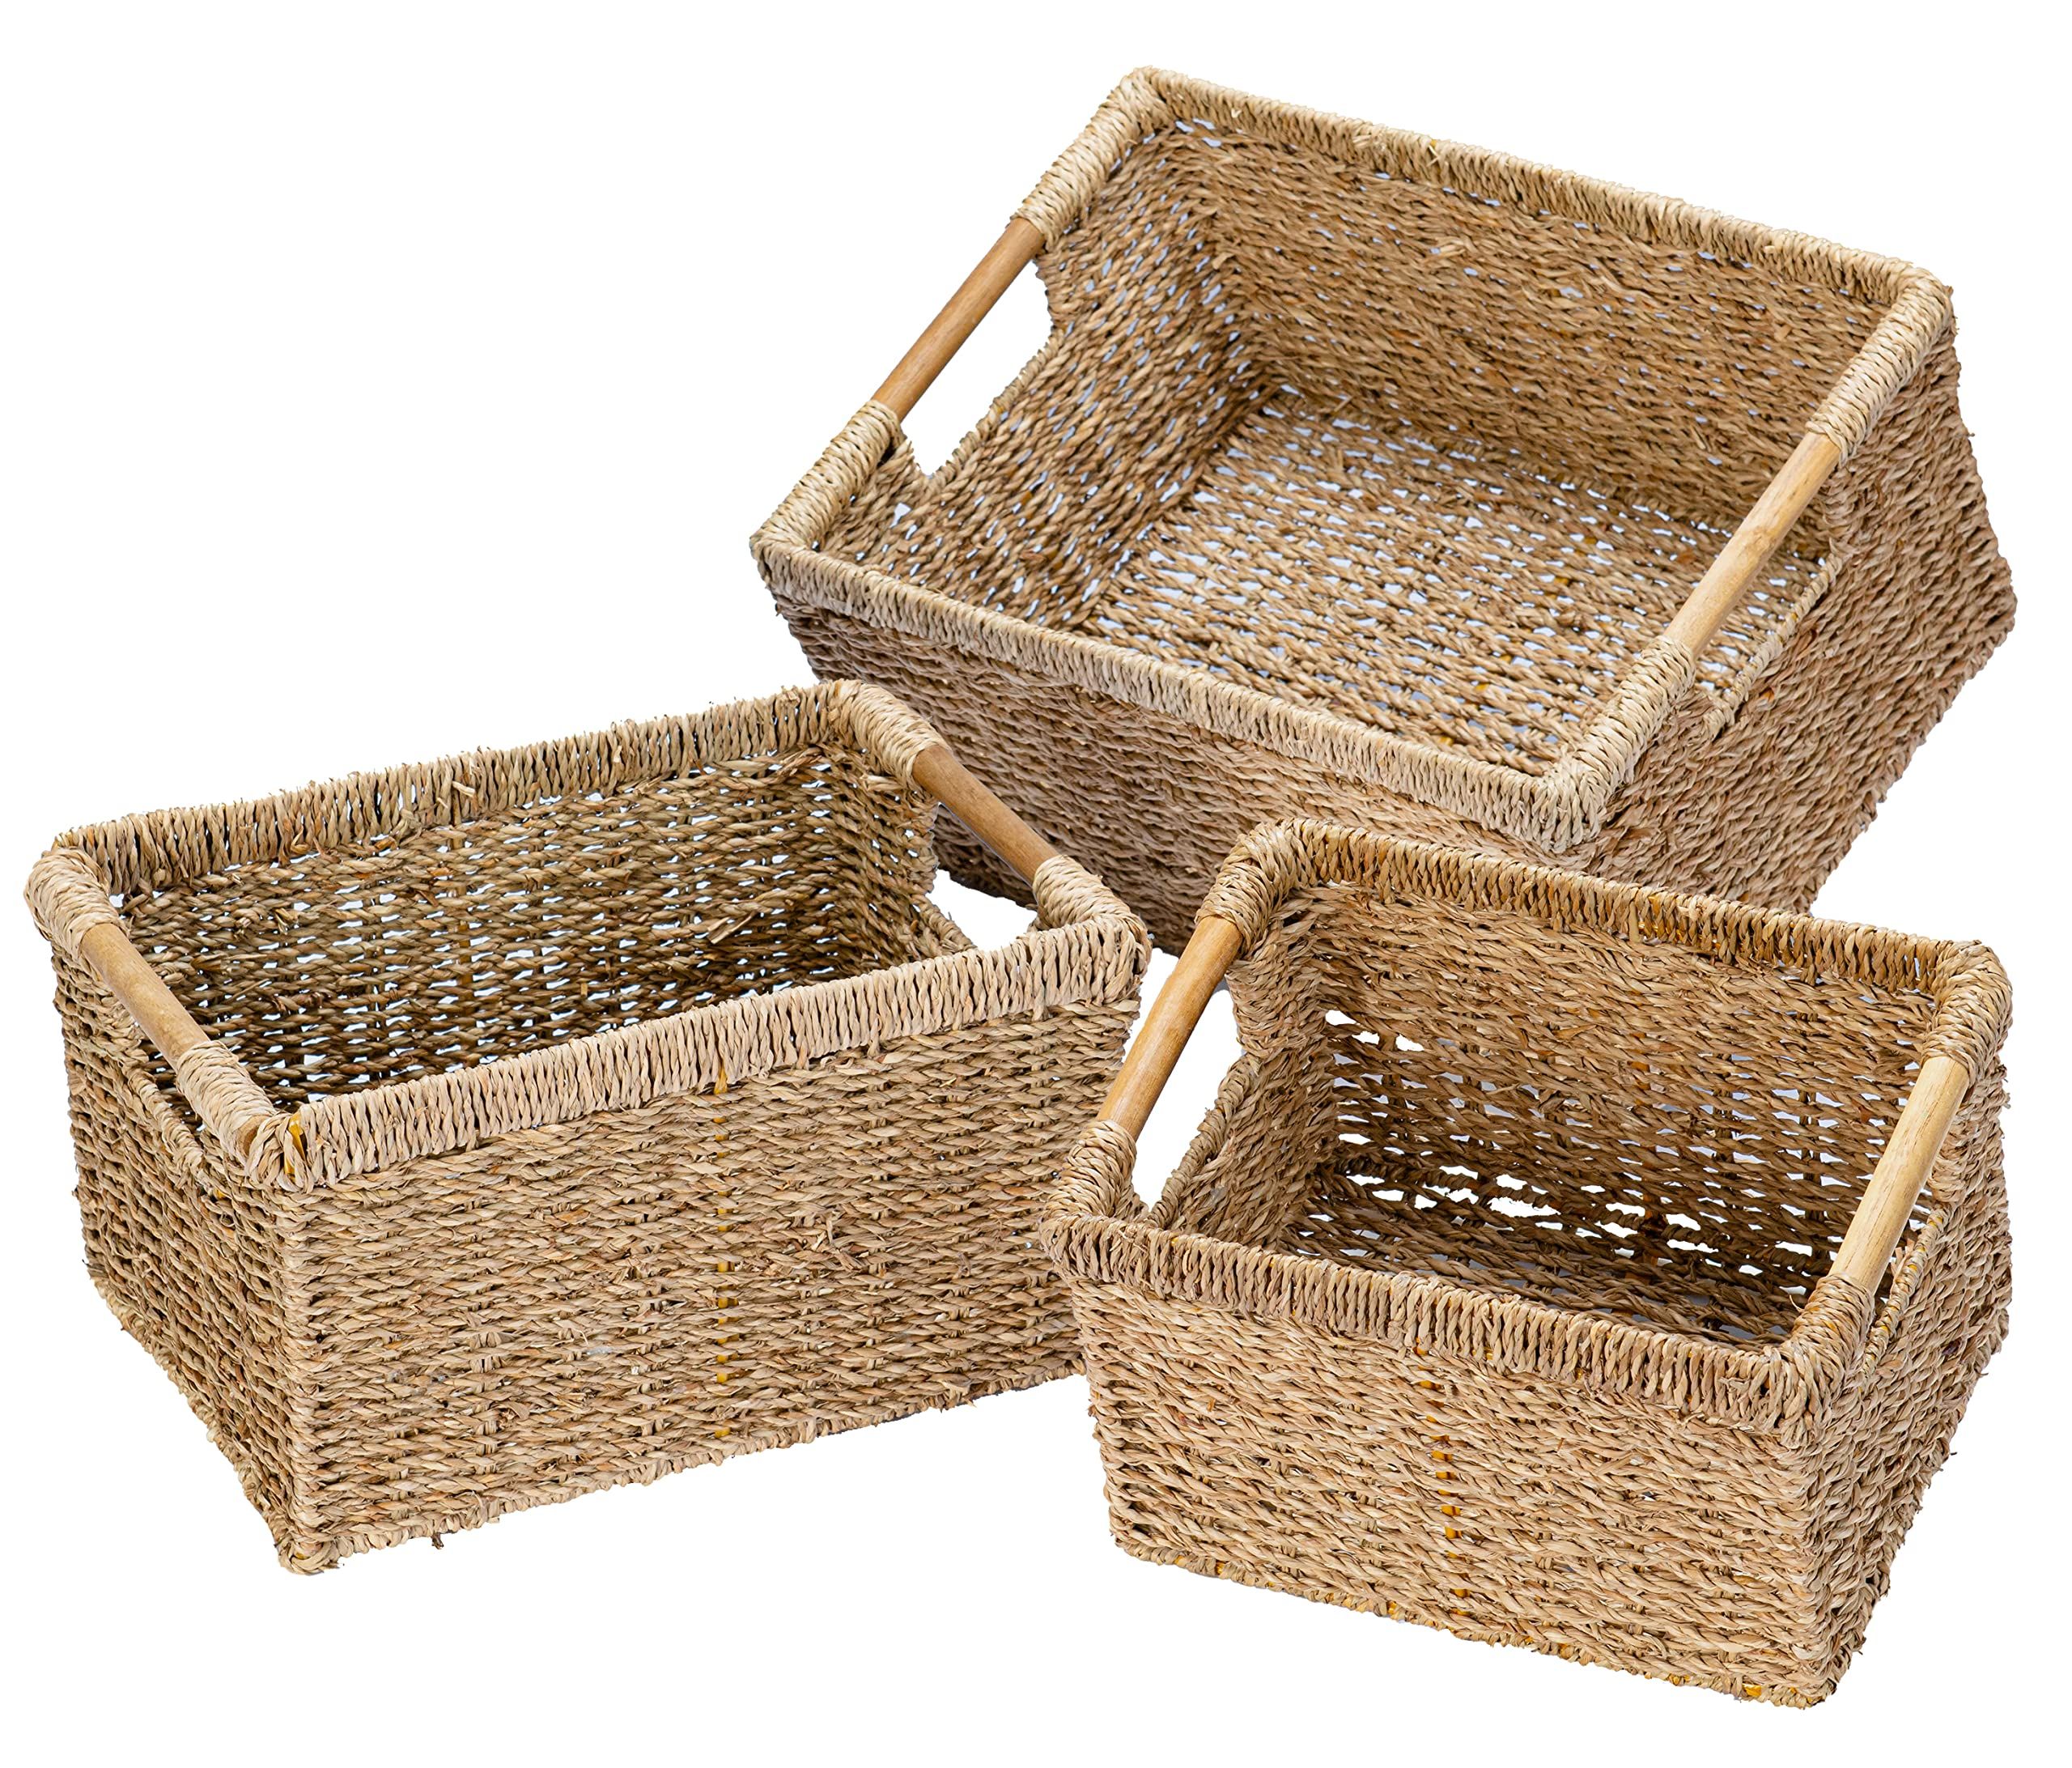 Wicker Baskets for Storage Organizing, Seagrass Storage Baskets Rectangular with Wooden Handles for  | Amazon (US)